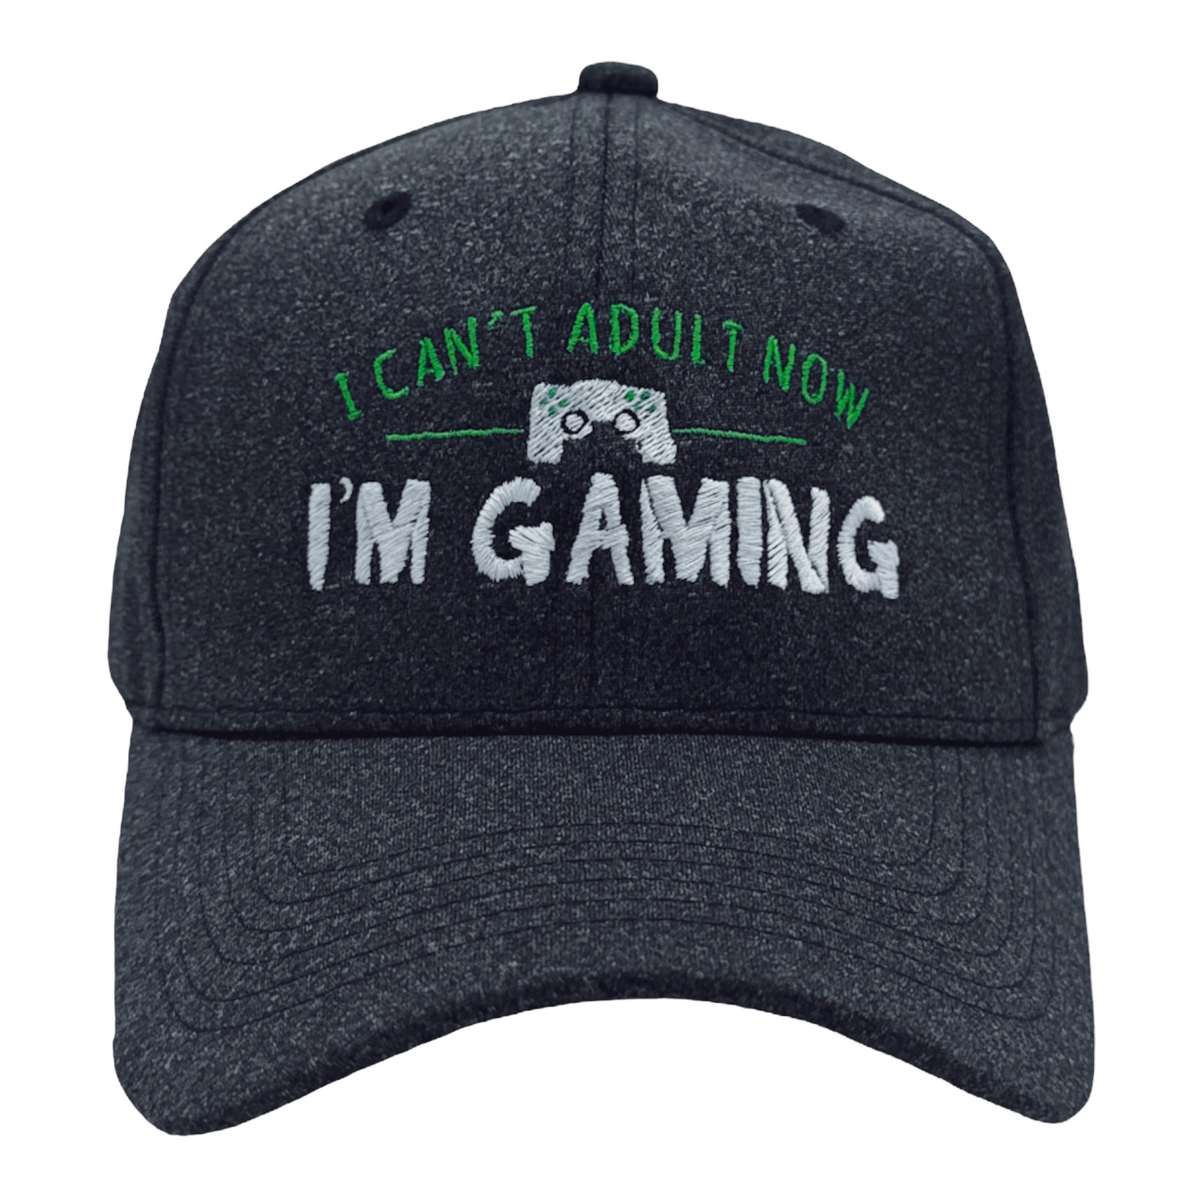 Funny Heather Black - Im Gaming I Cant Adult Now Im Gaming Nerdy sarcastic Video Games Tee